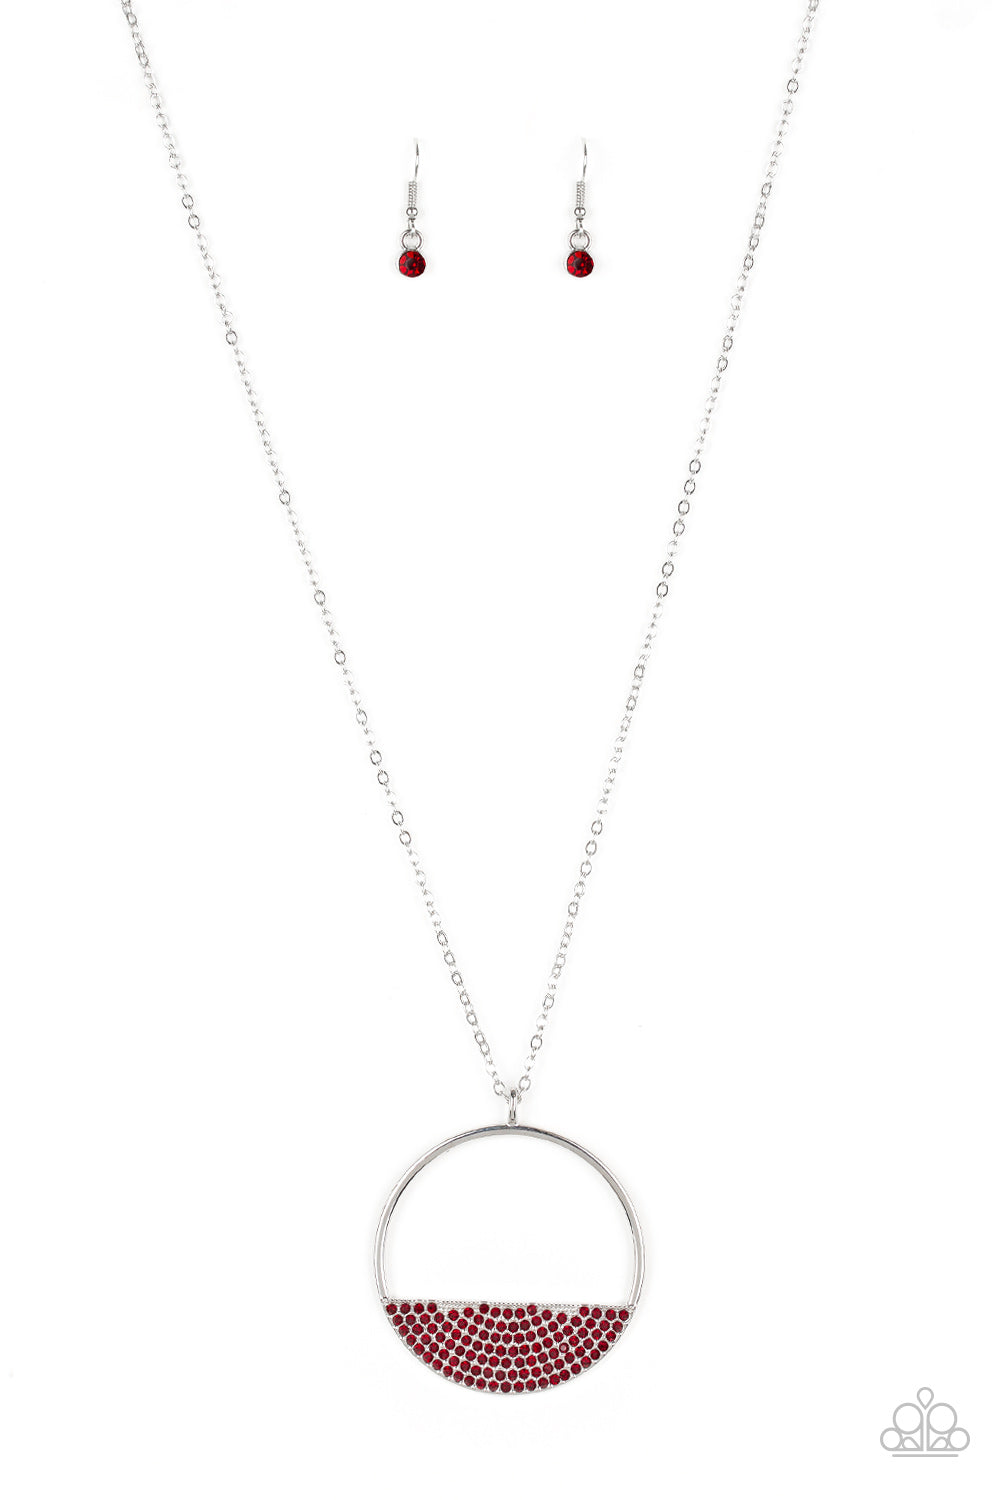 Bet Your Bottom Dollar - red - Paparazzi necklace